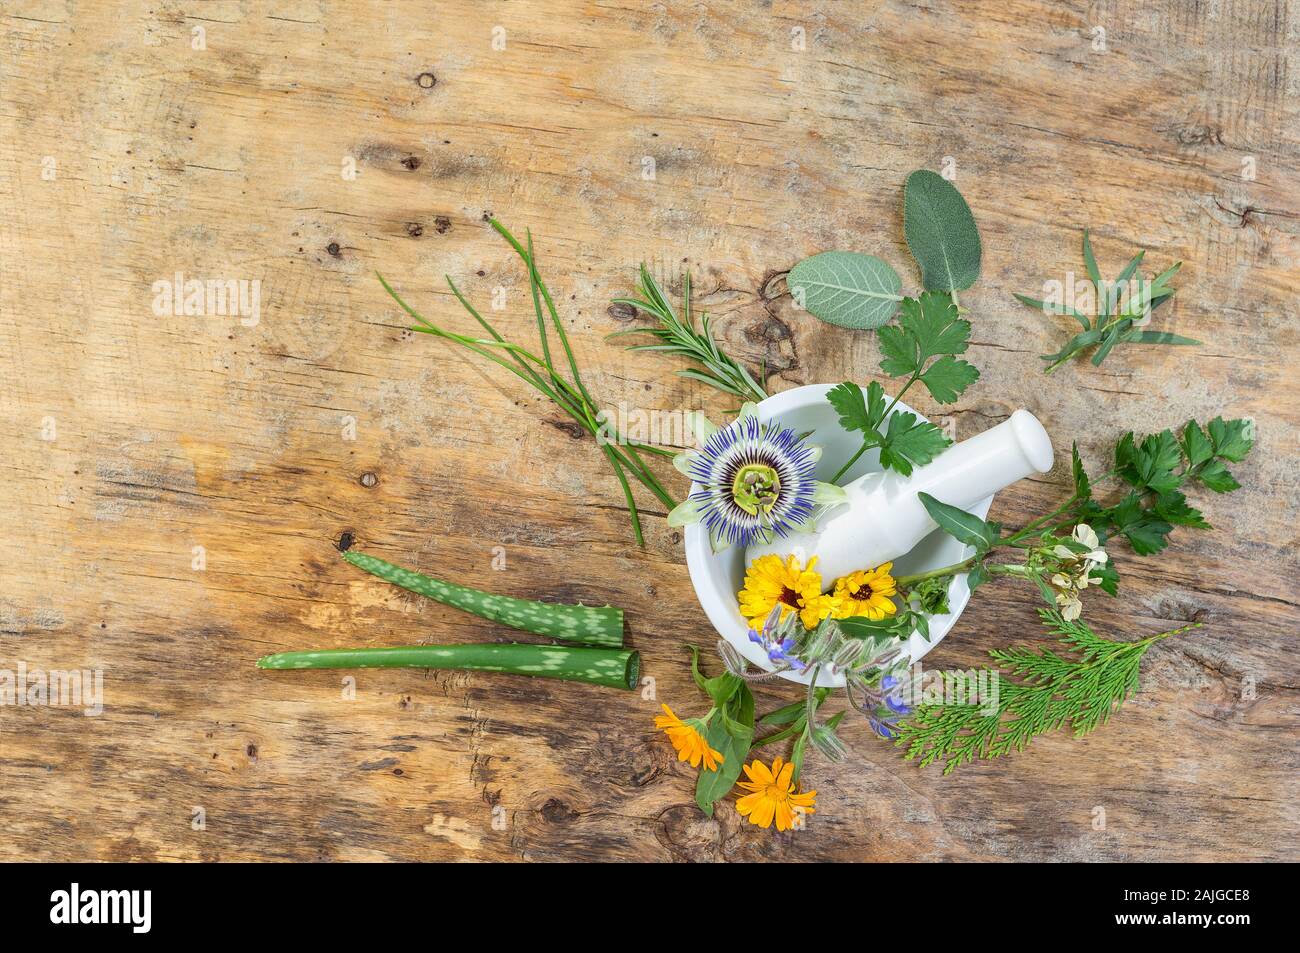 Herb leaf selection of golden thyme, oregano, purple sage, mint and rosemary in flower in a rustic olive wood mortar with pestle, isolated on wooden board background. Stock Photo